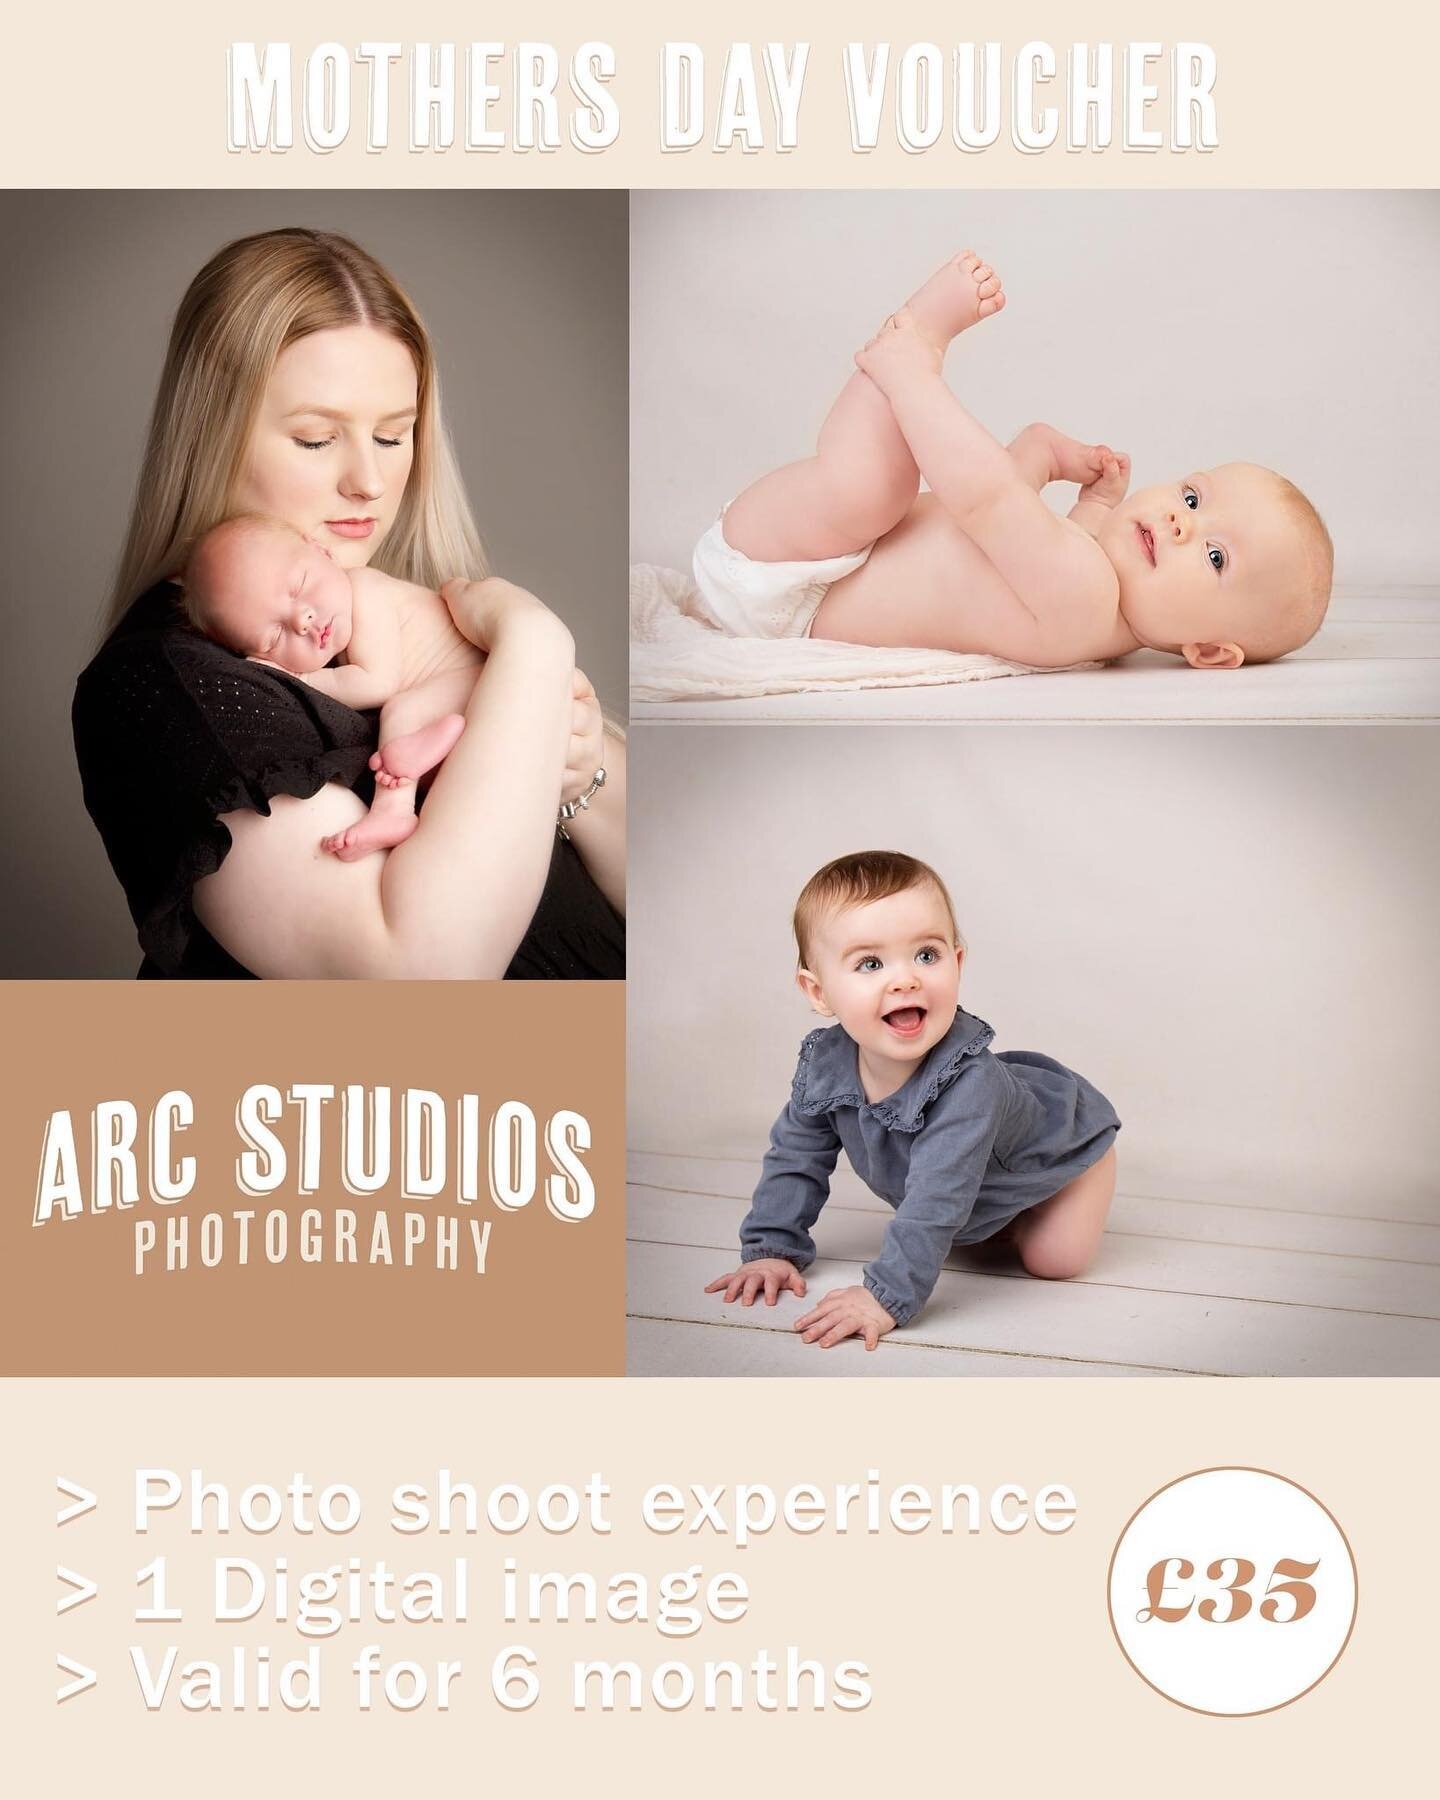 Photos, The perfect gift for any Mom! Our Mother's Day voucher has got you covered!

Includes:

Photoshoot which will take place in our Lichfield photography studio and can be used for of just children or mom and her children

Viewing appointment whe